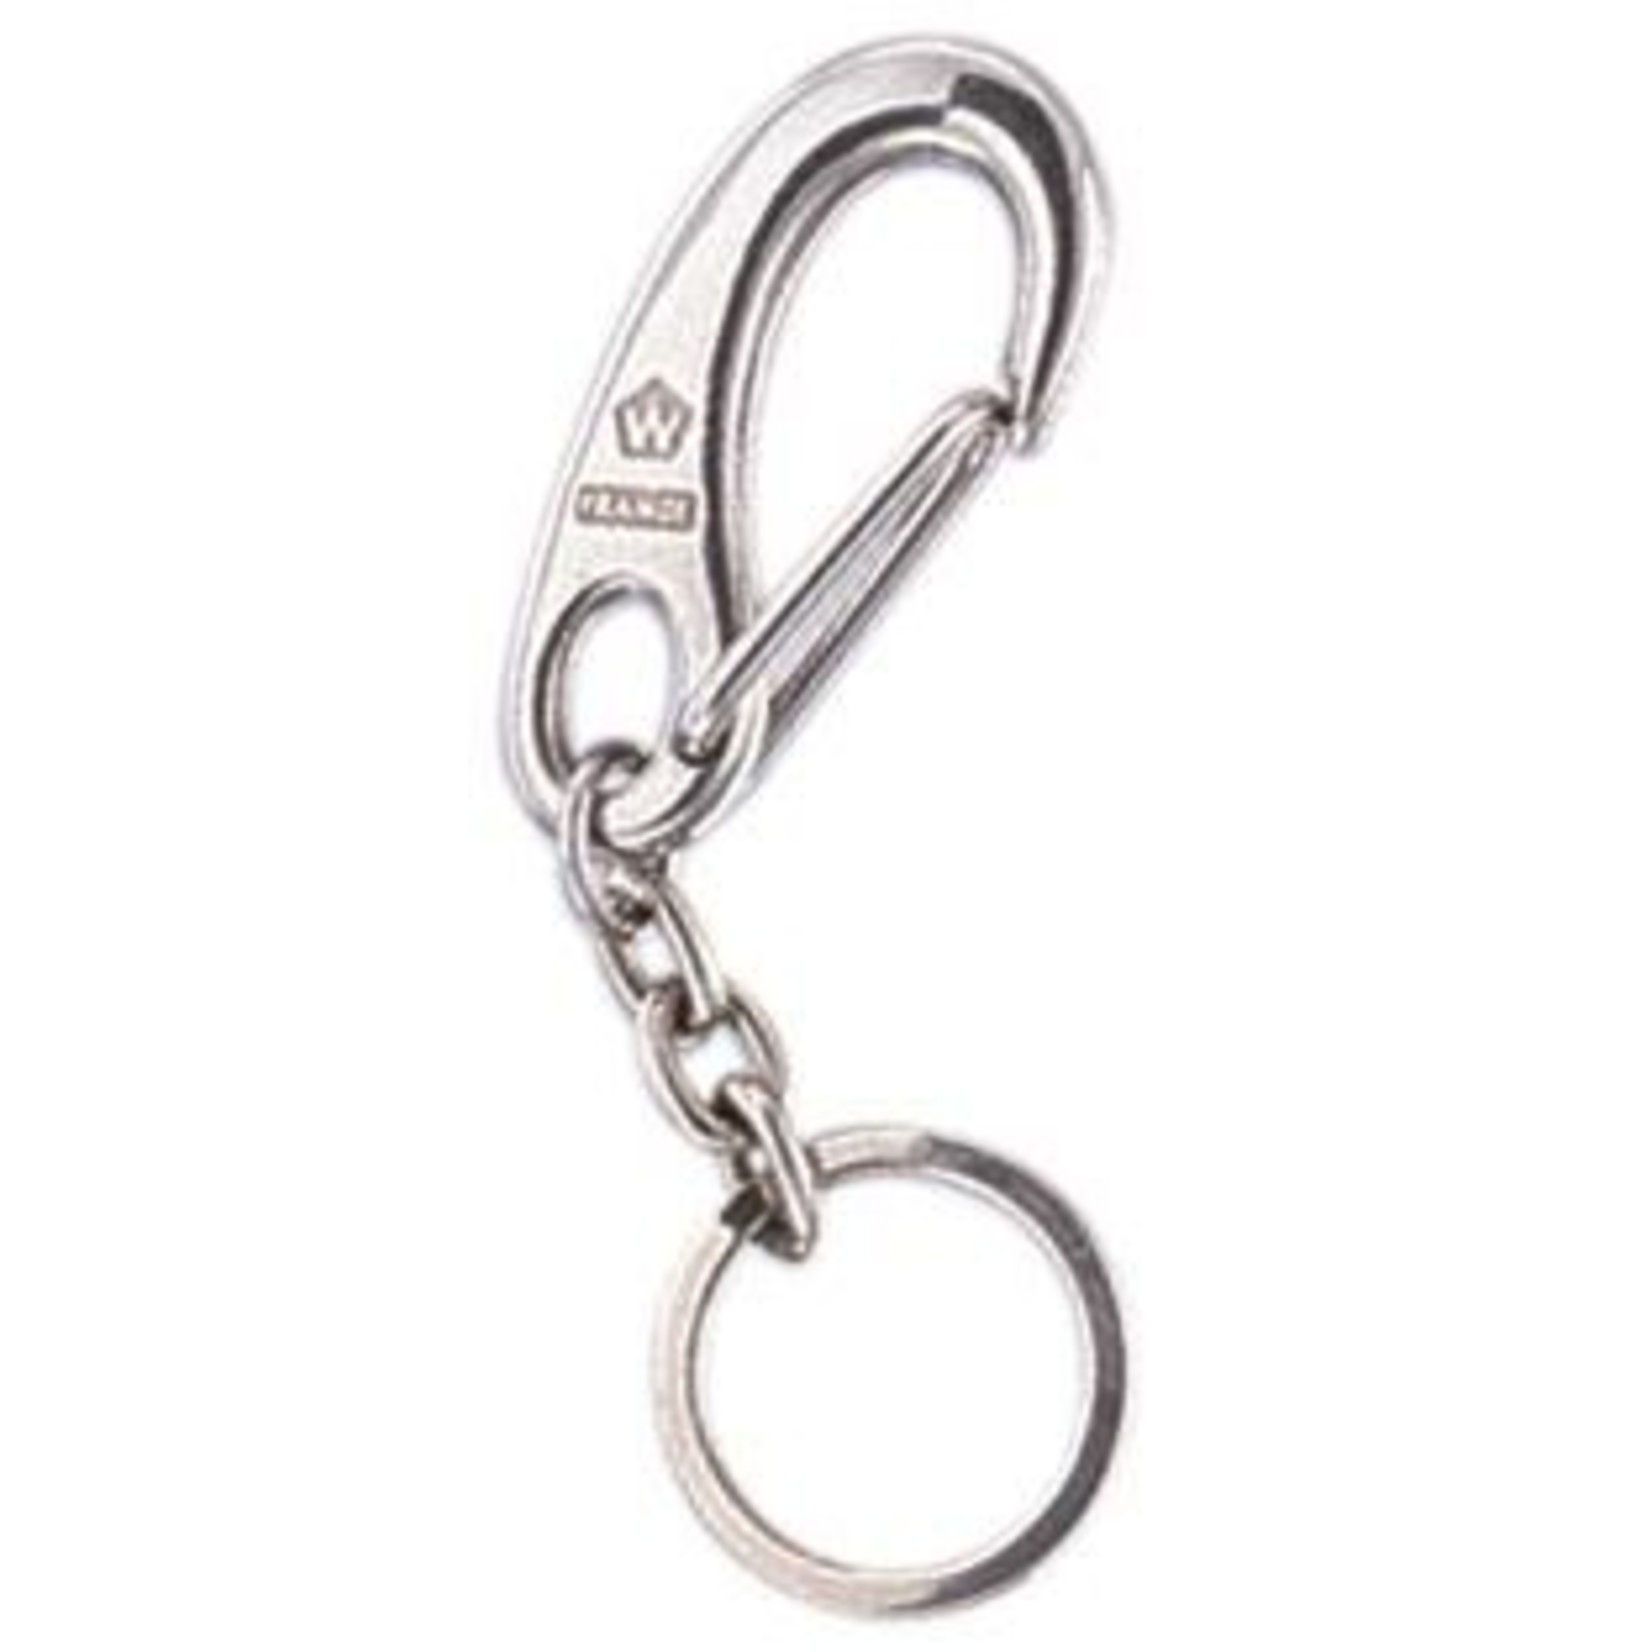 Wichard Key-ring with snap hook part # 2480